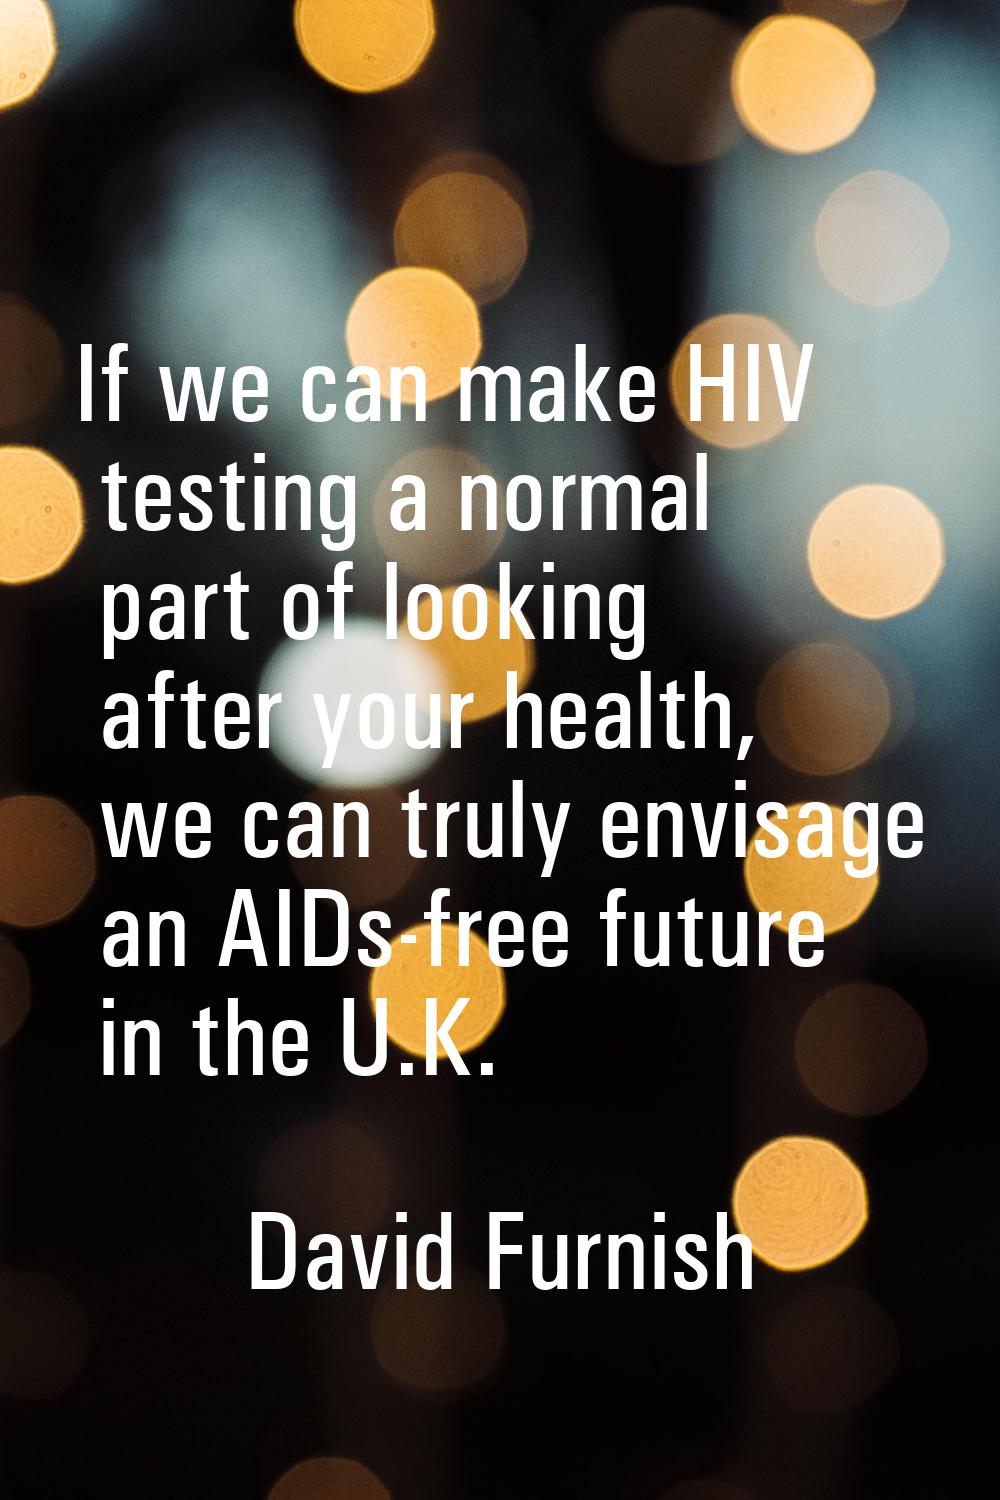 If we can make HIV testing a normal part of looking after your health, we can truly envisage an AID